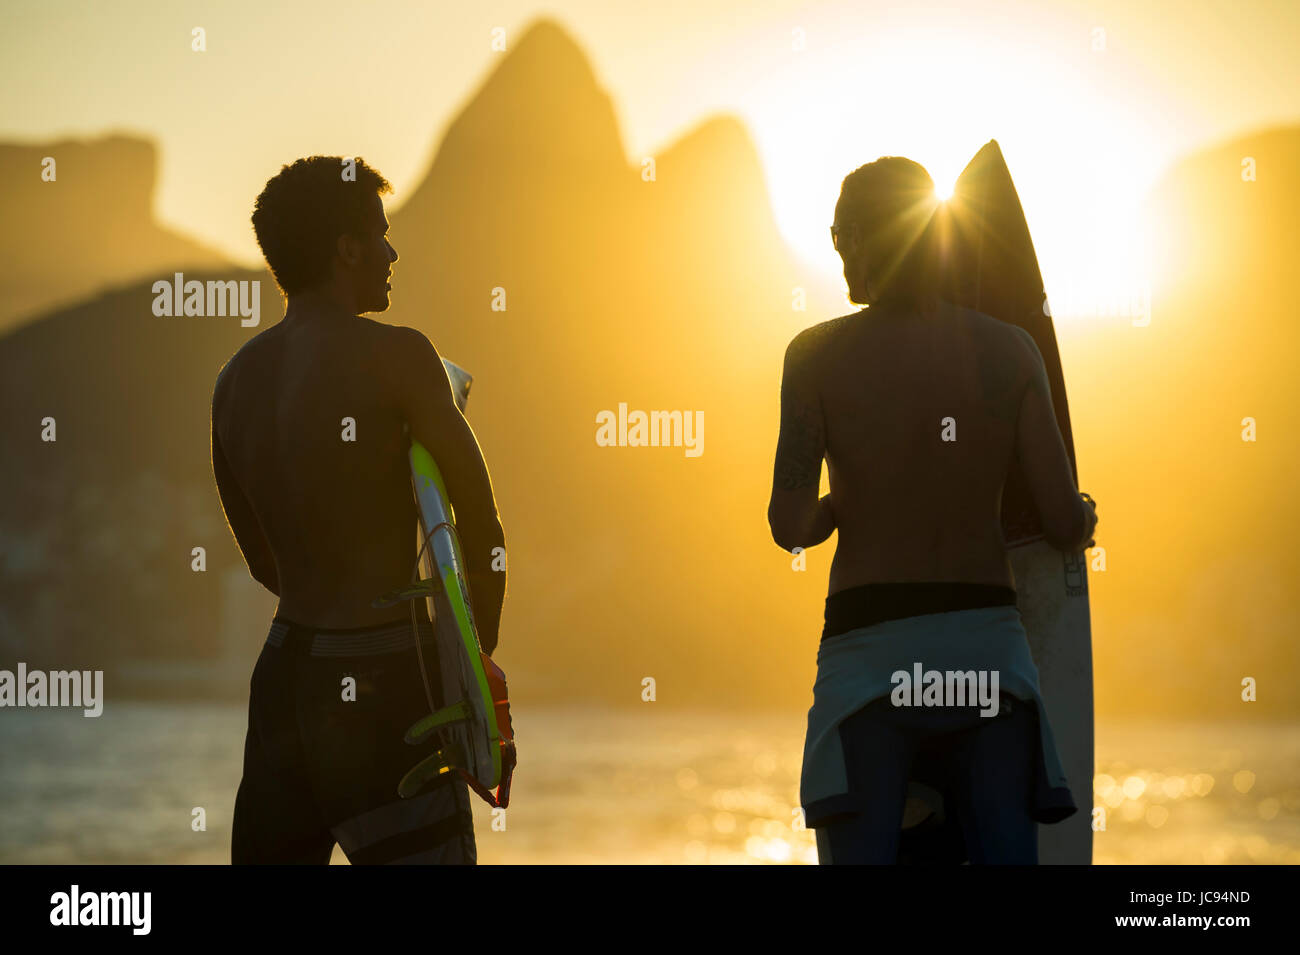 RIO DE JANEIRO - MARCH 20, 2017: Sunset silhouettes of two young surfers with surfboards at Arpoador with two brothers mountains in the background Stock Photo